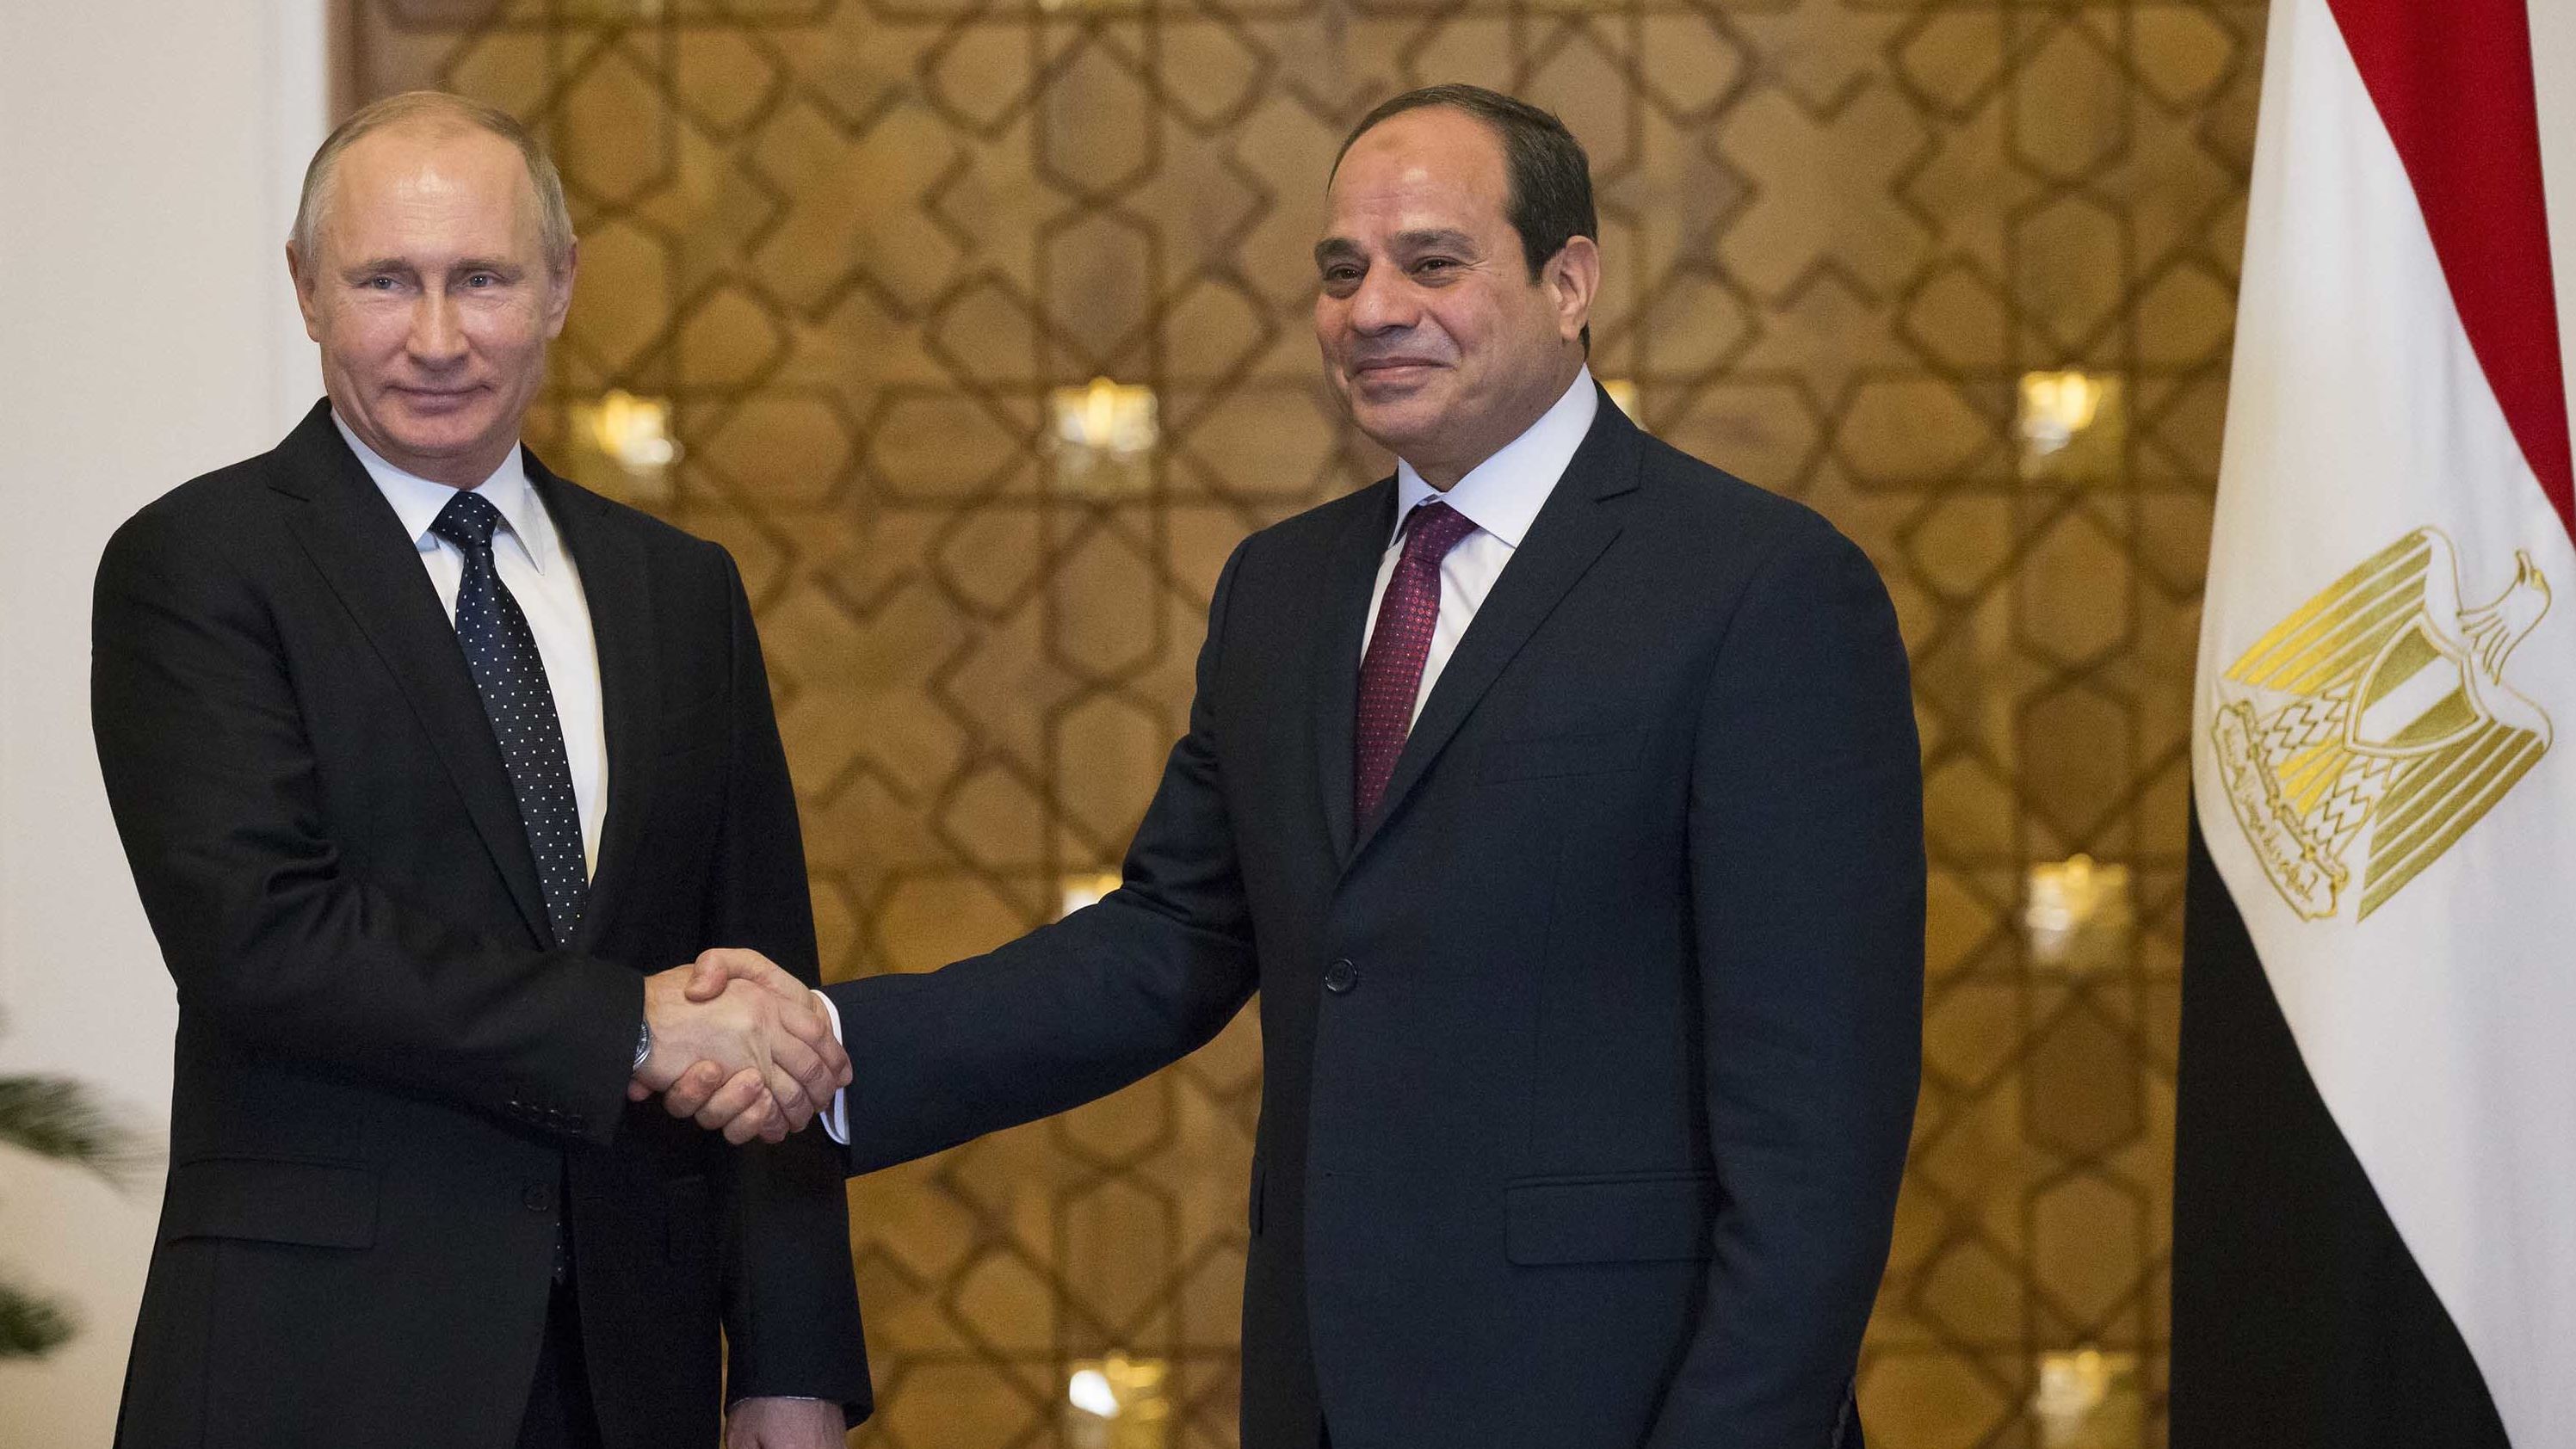 Putin (L) and Sisi shake hands during their meeting in Cairo on Monday.